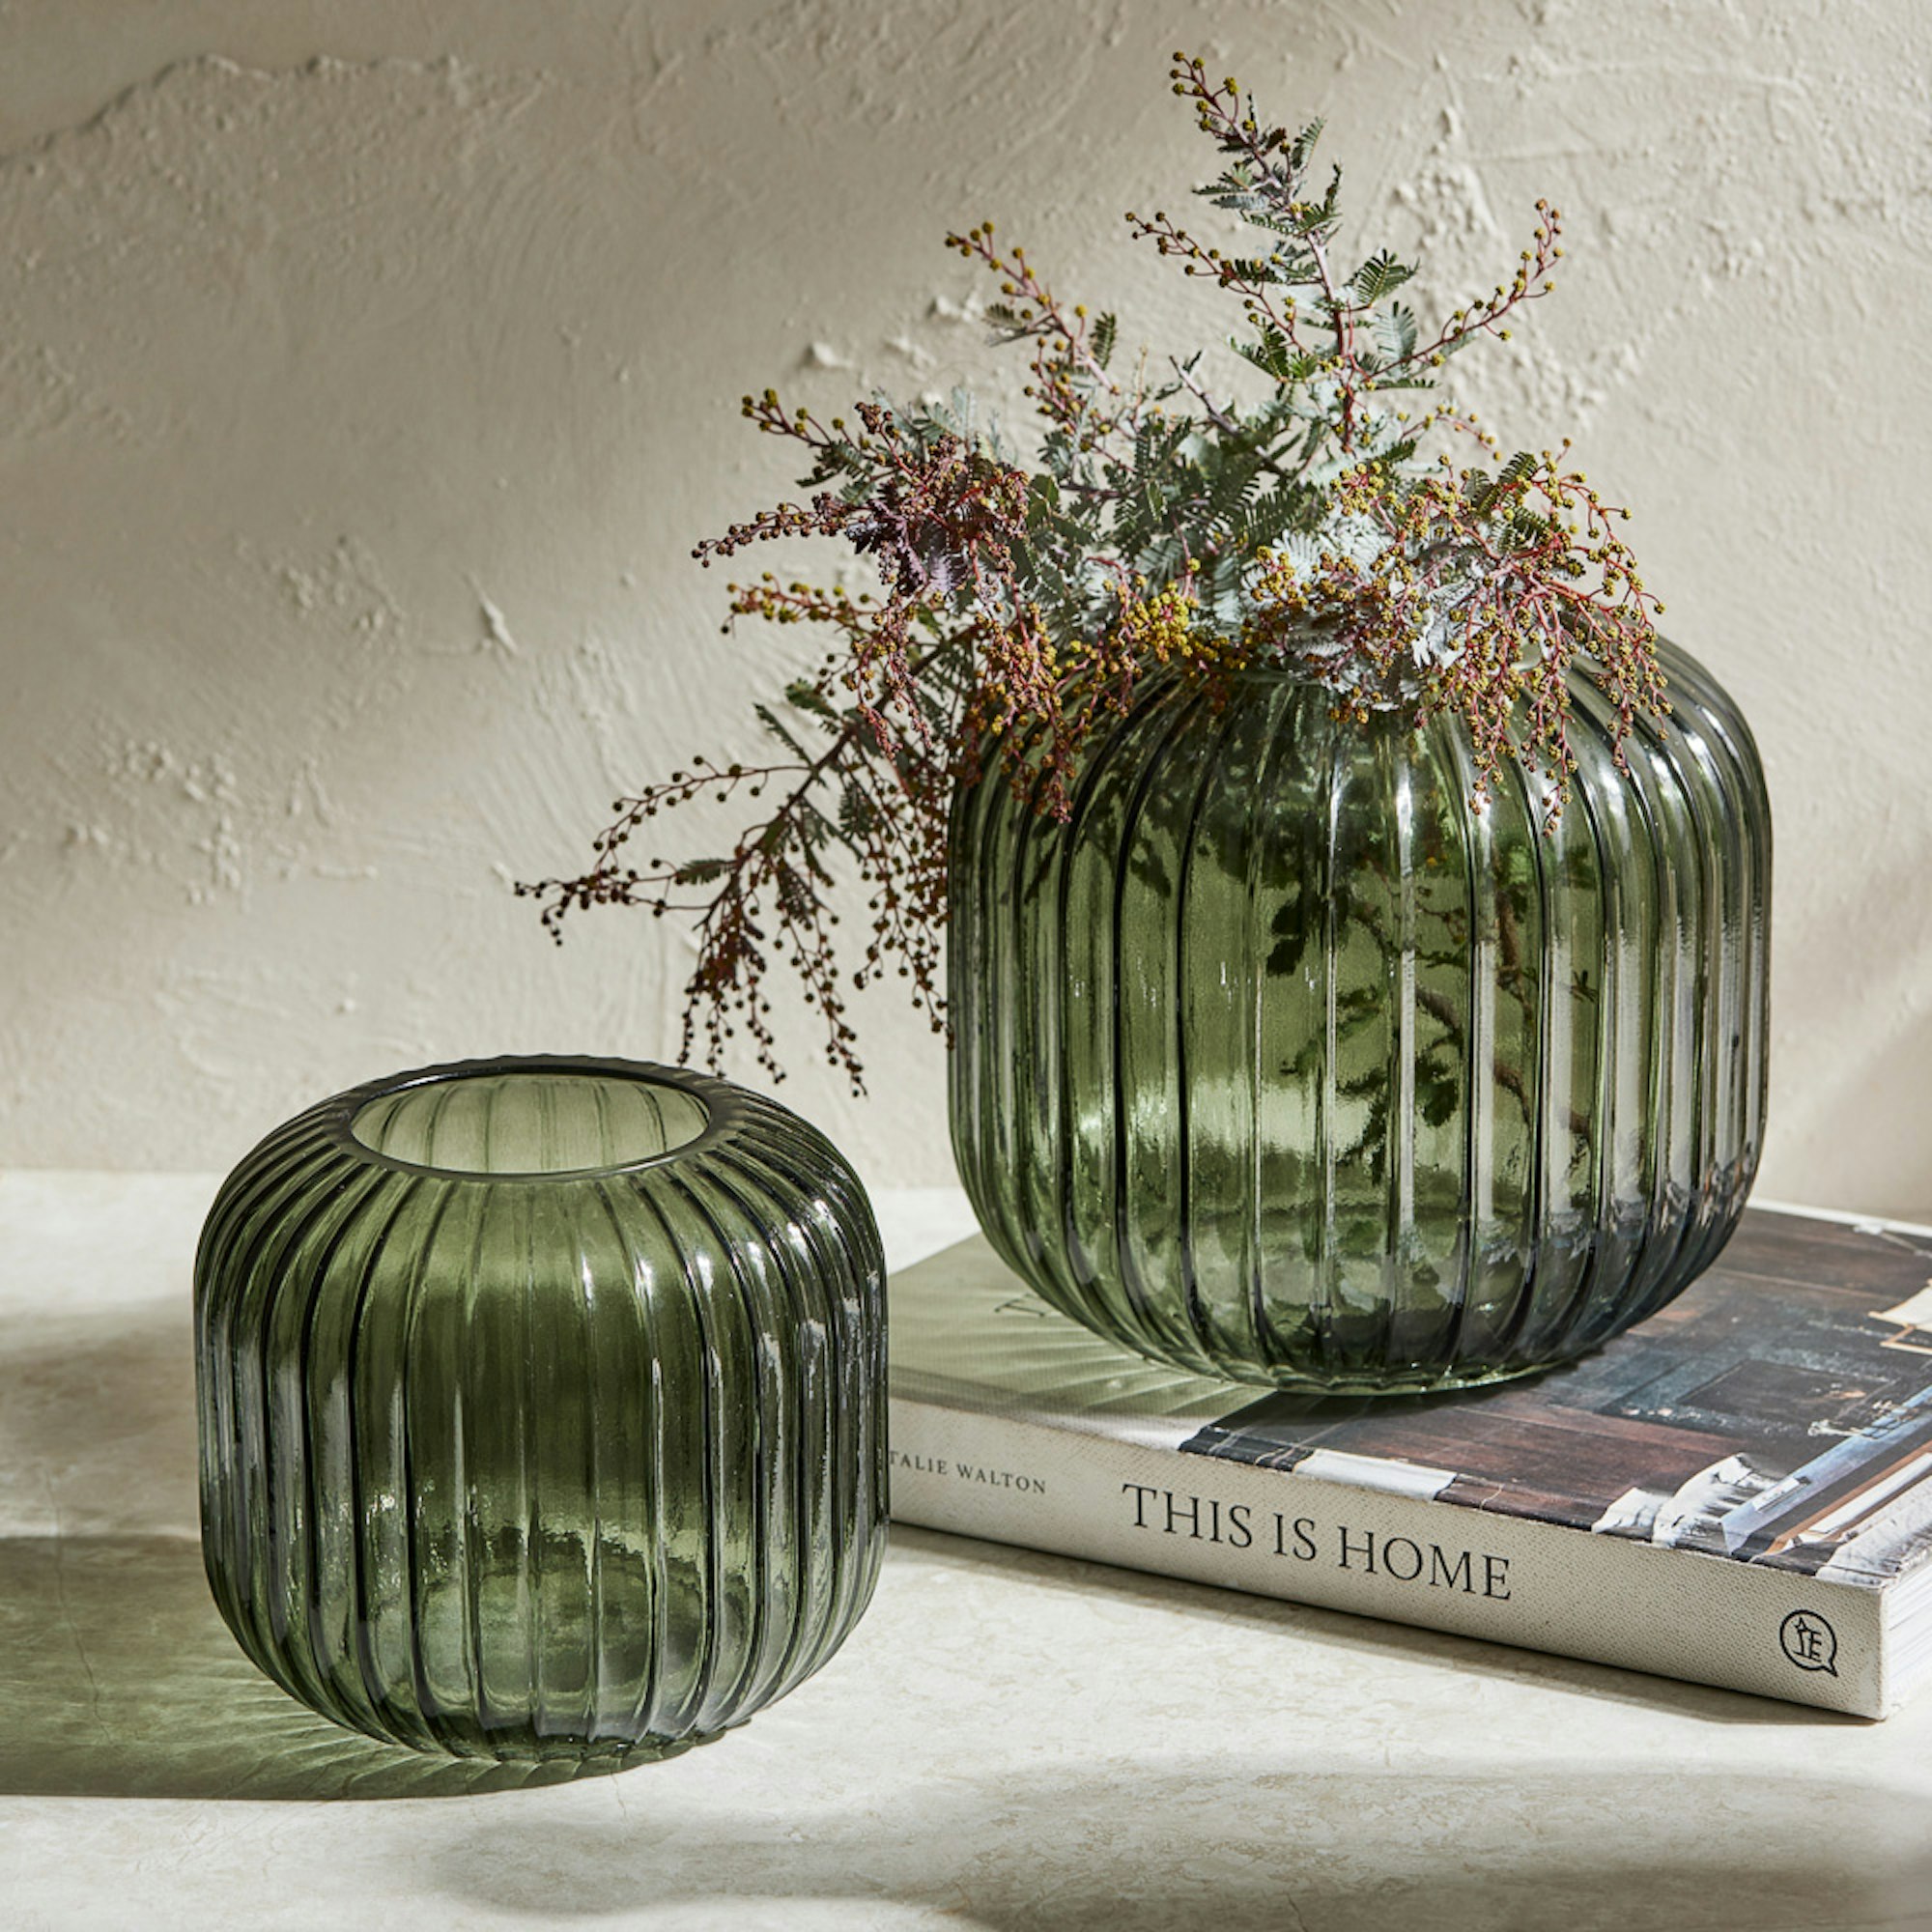 Two green ribbed vases with flowers sitting on books